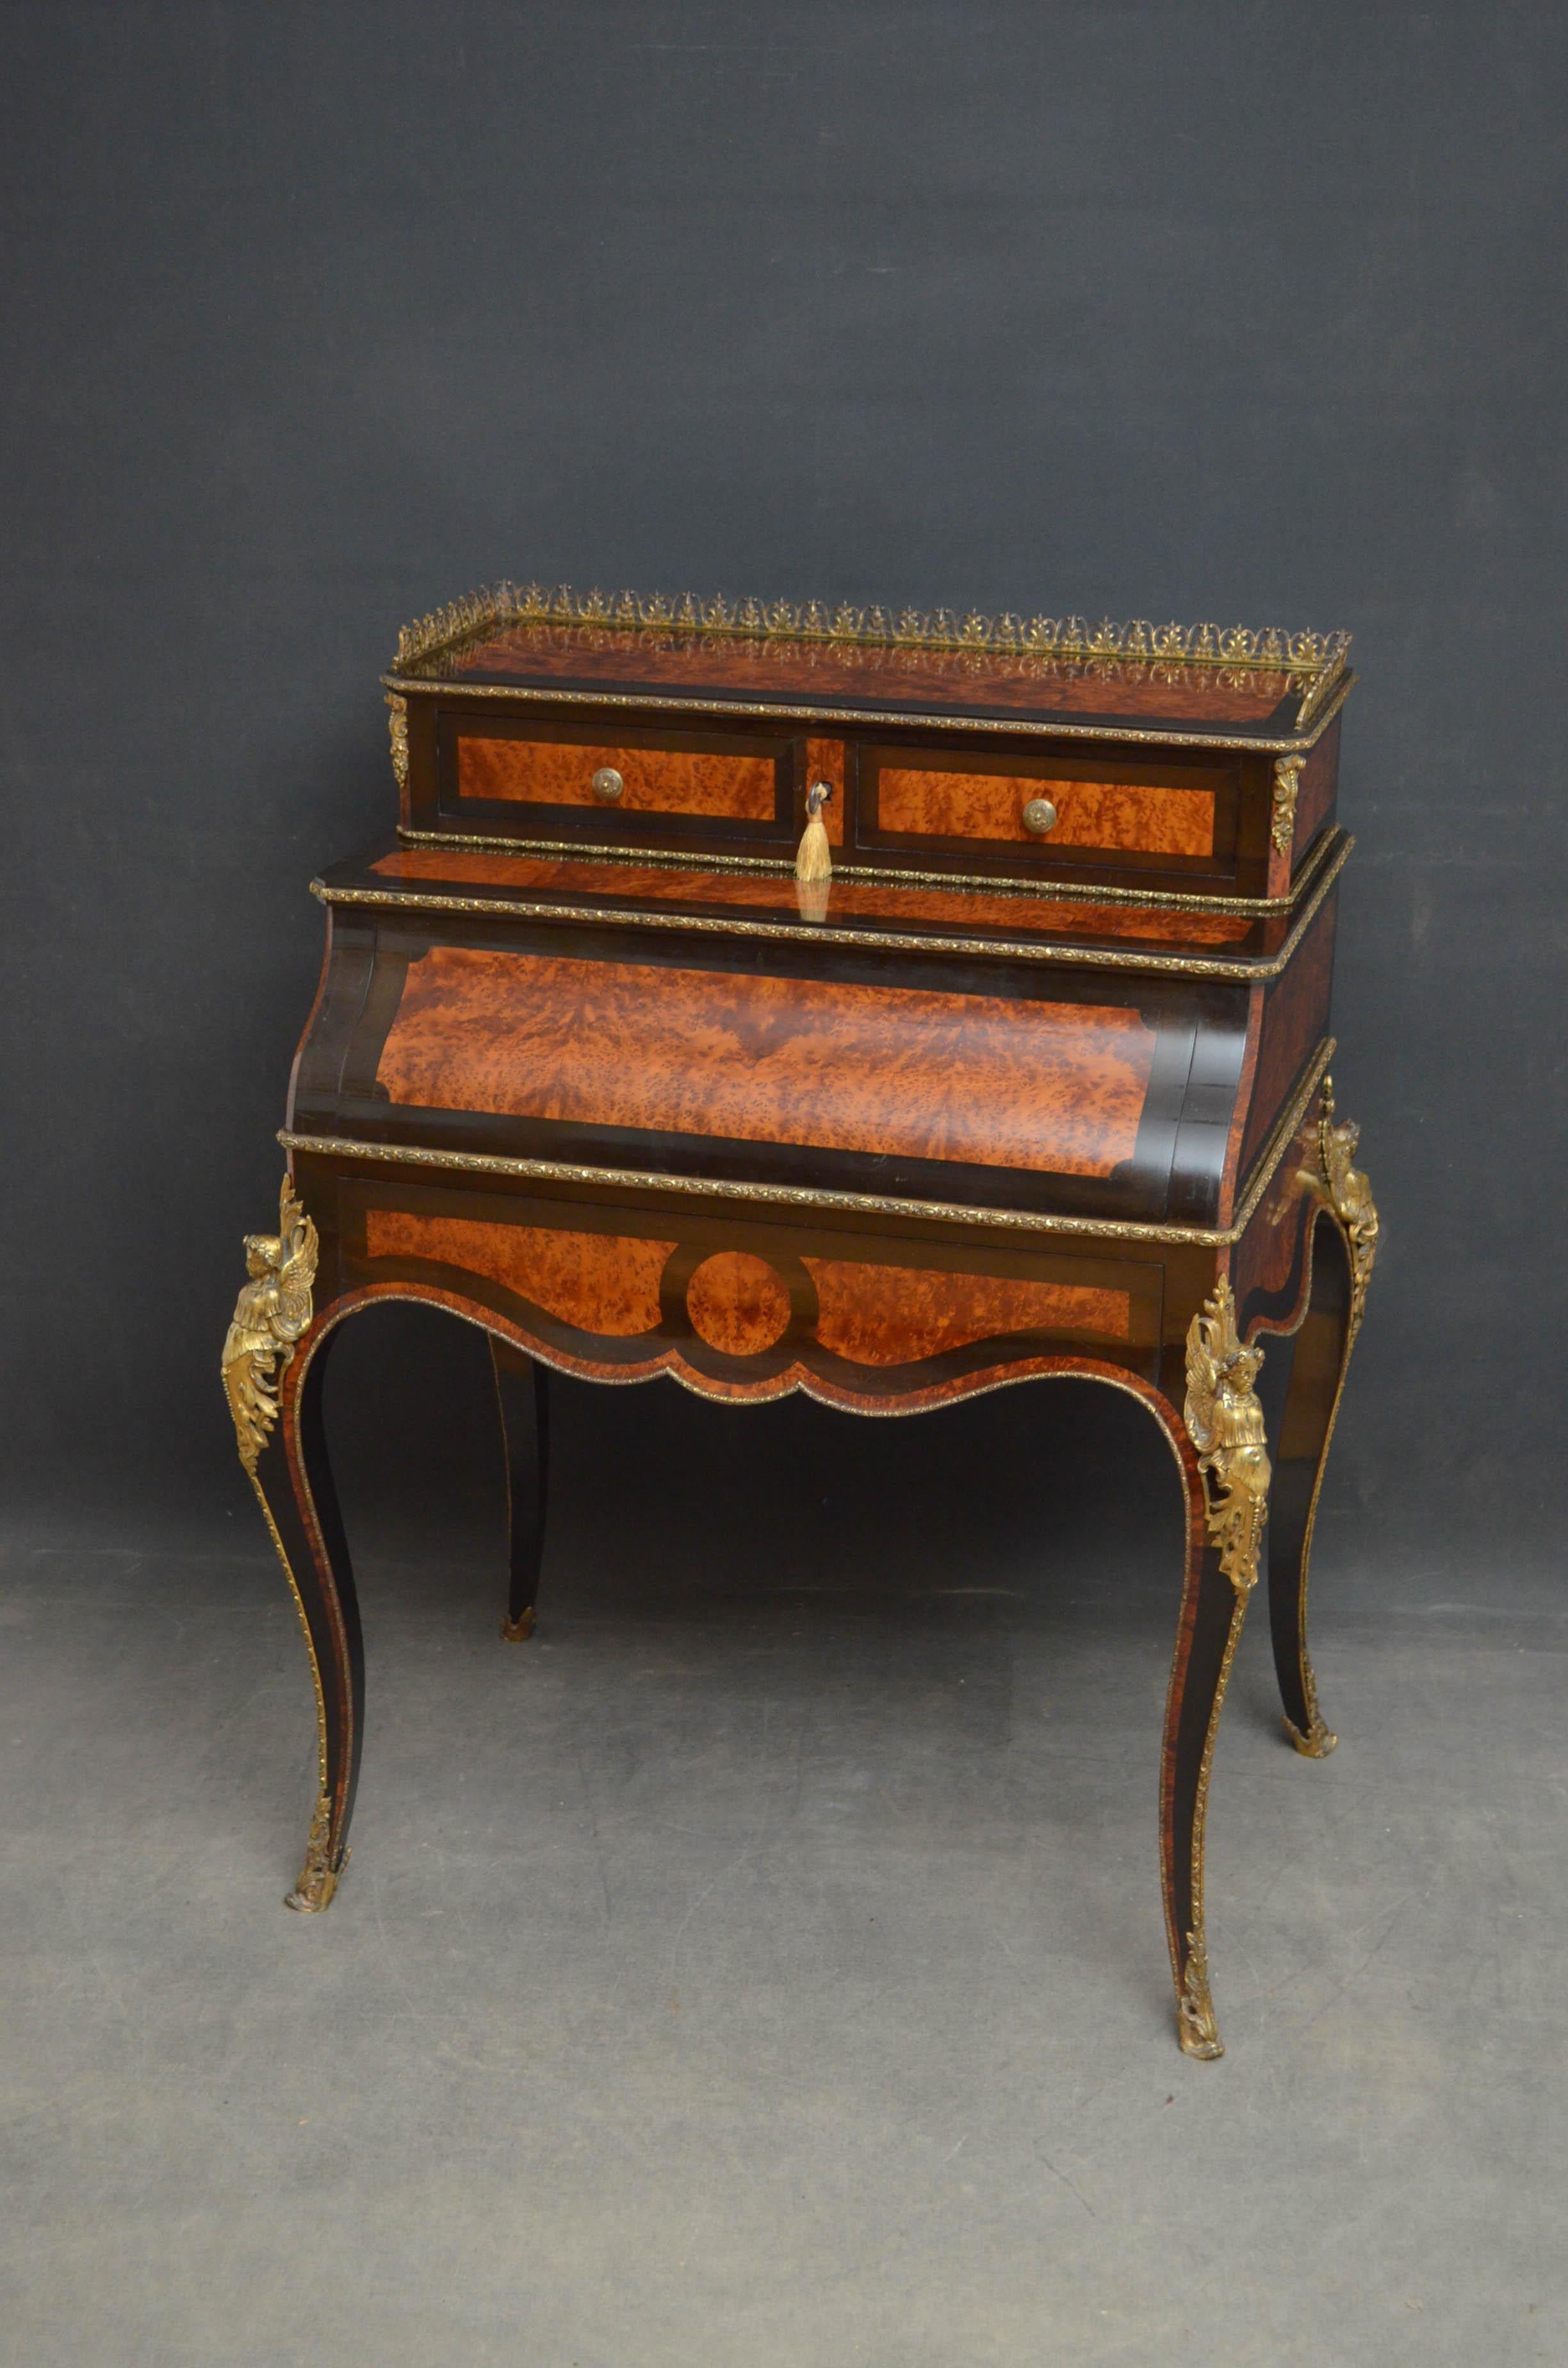 Sn4737, a superb French bureau du Jour in amboyna, having brass gallery to top, 2 mahogany lined drawers and a shaped fall which opens to reveal black leather writing surface and small drawers above a frieze drawer, standing on cabriole legs with